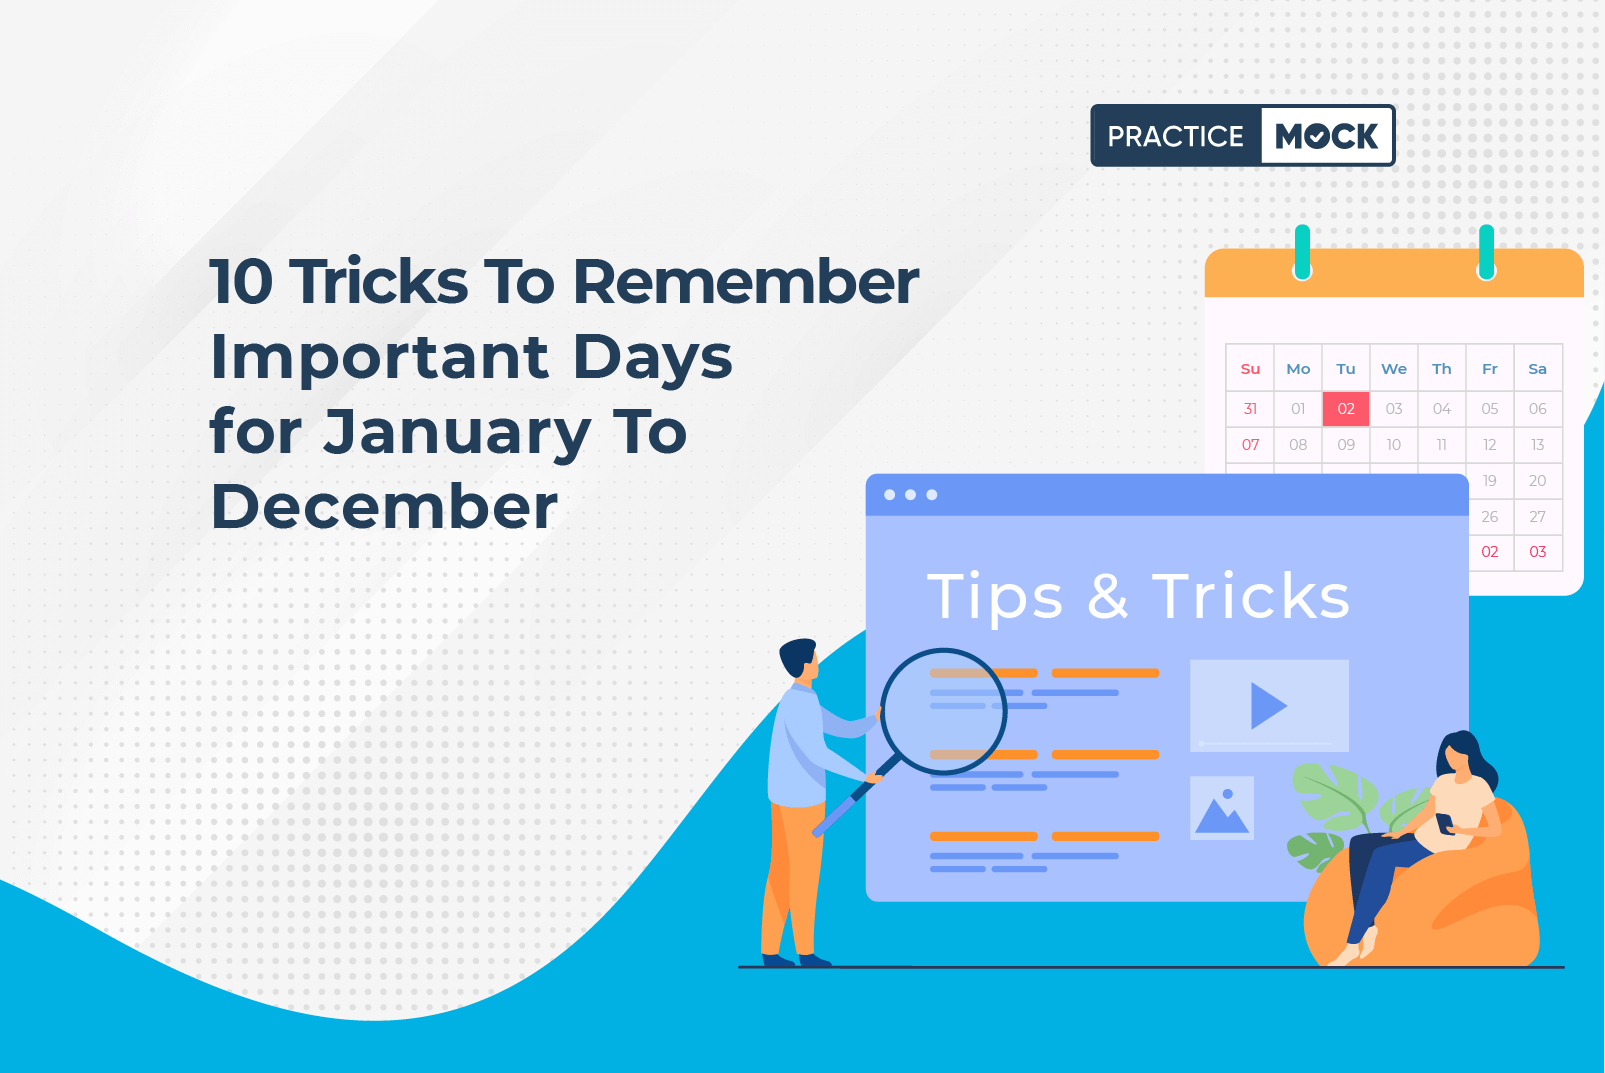 10 Tricks To Remember Important Days for January To December